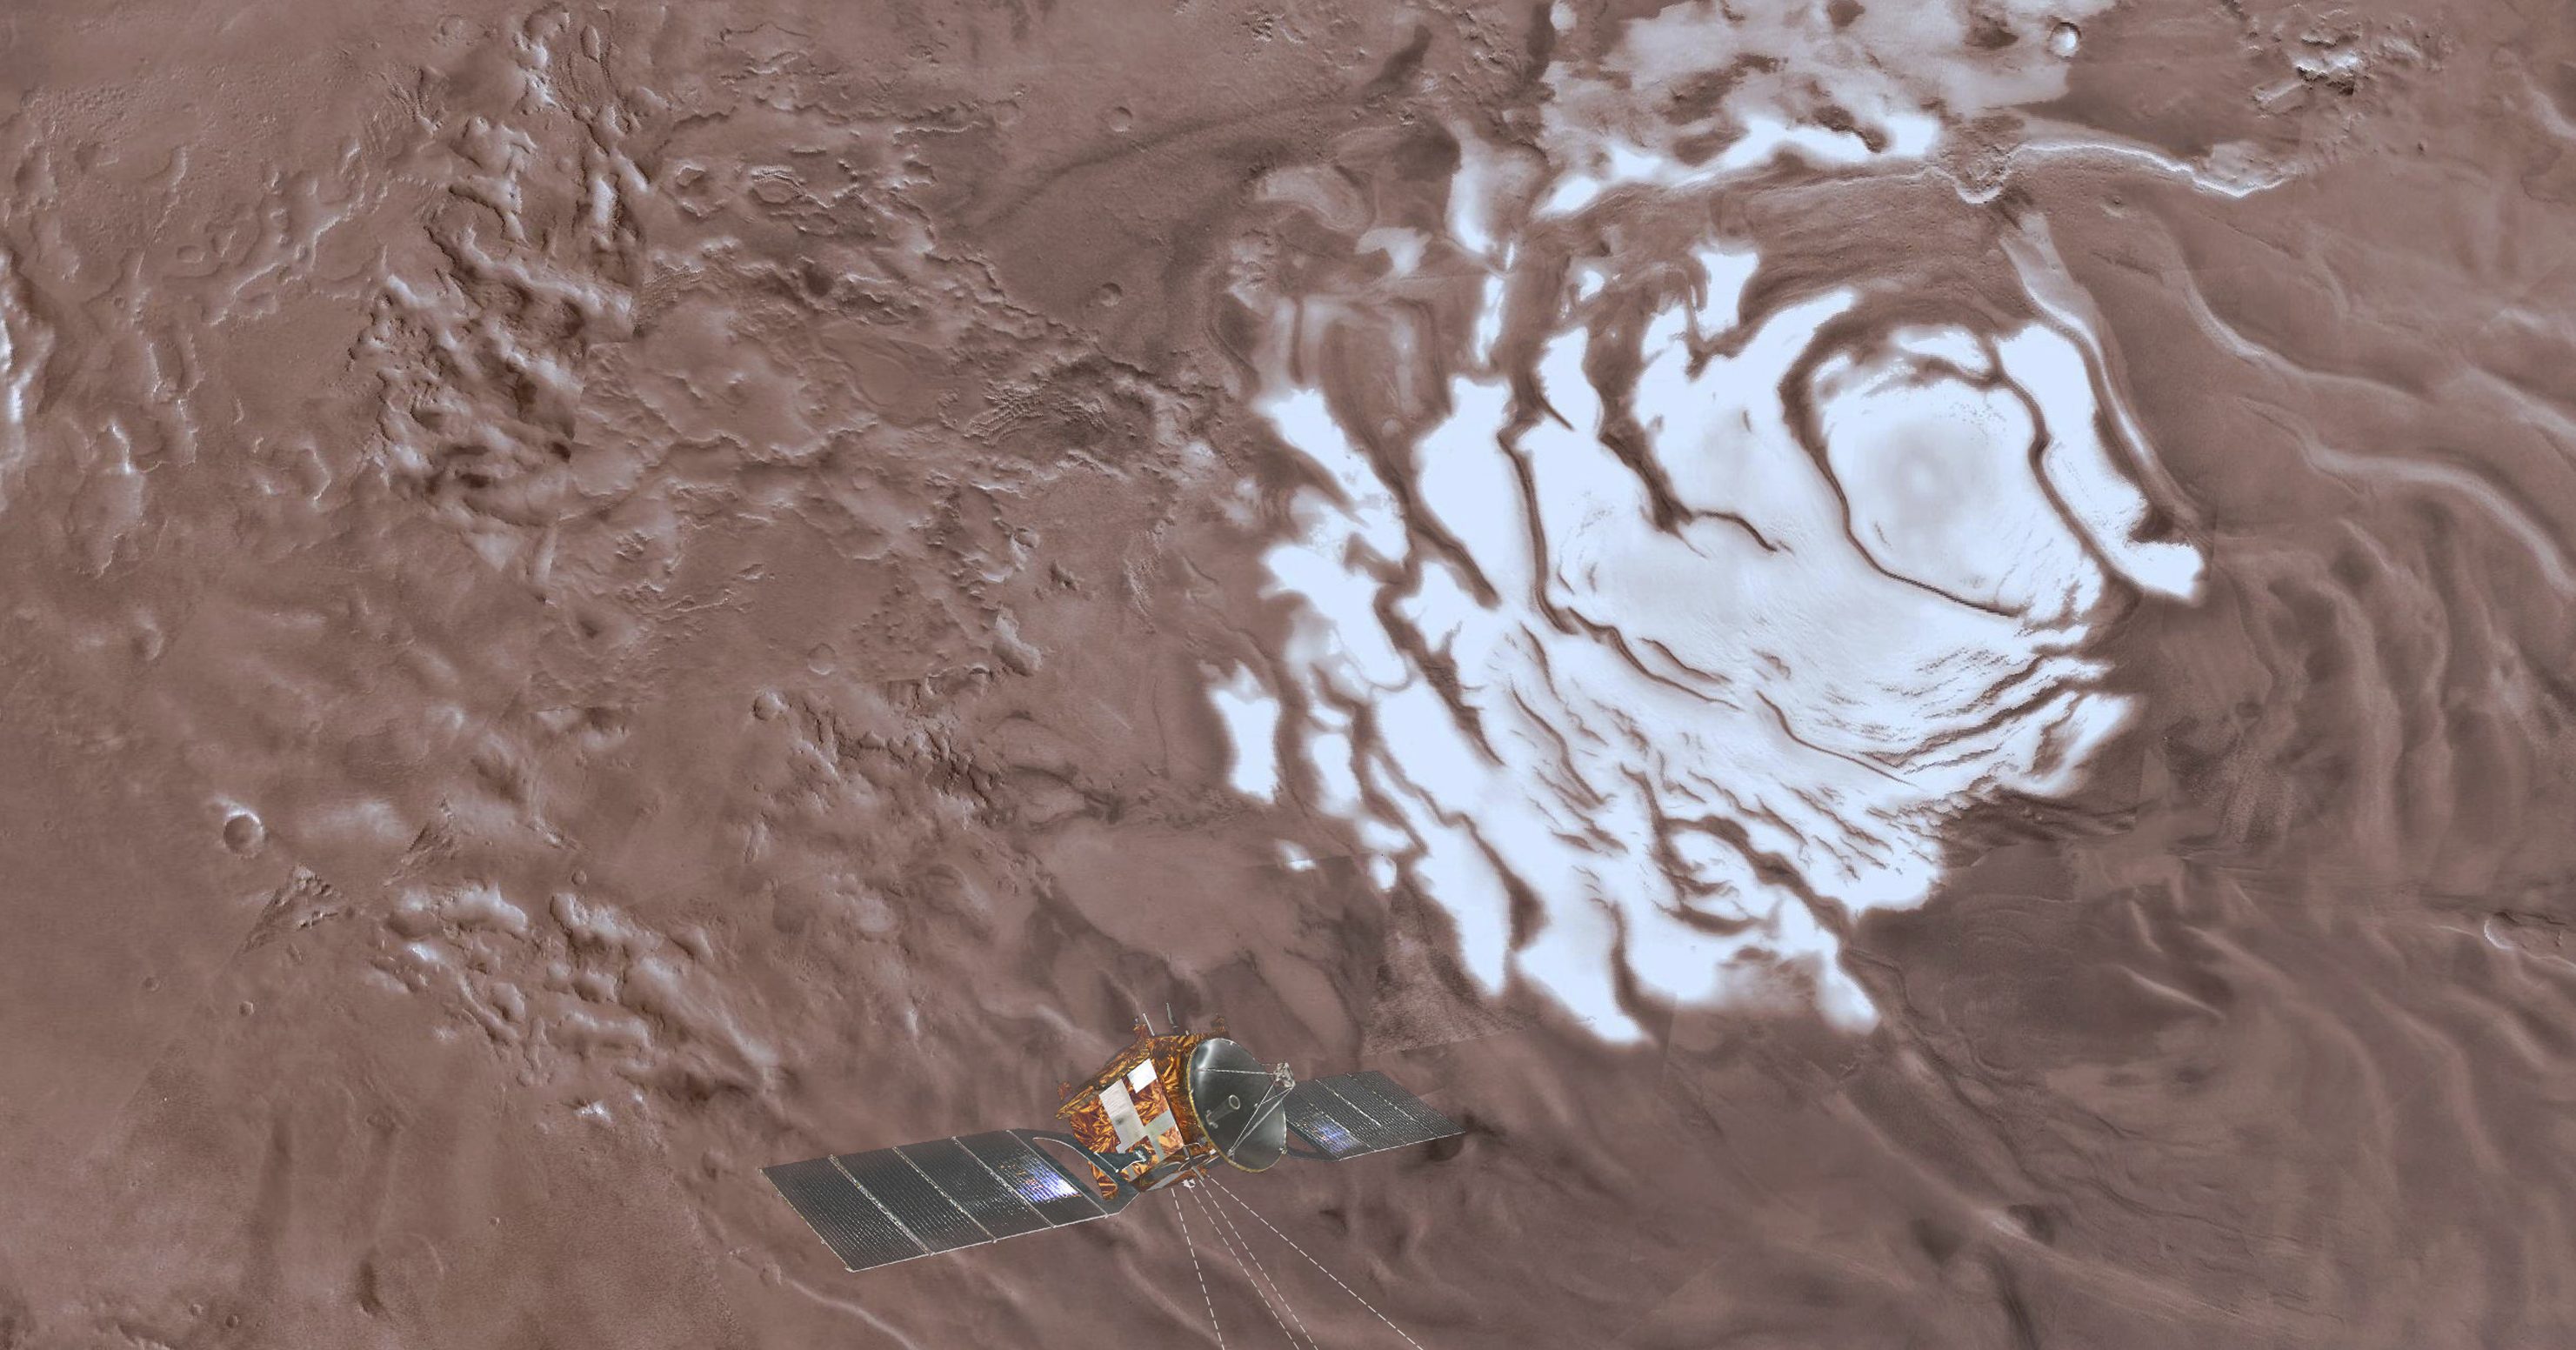 This image provided by the ESA/INAF shows an artist's rendering of the Mars Express spacecraft probing the southern hemisphere of Mars. At upper right is the planet's southern ice cap. The inset image at lower right shows the area where radar readings were made. The blue triangle indicates an area of very high reflectivity, interpreted as being caused by the presence of a reservoir of water, about a mile below the surface.